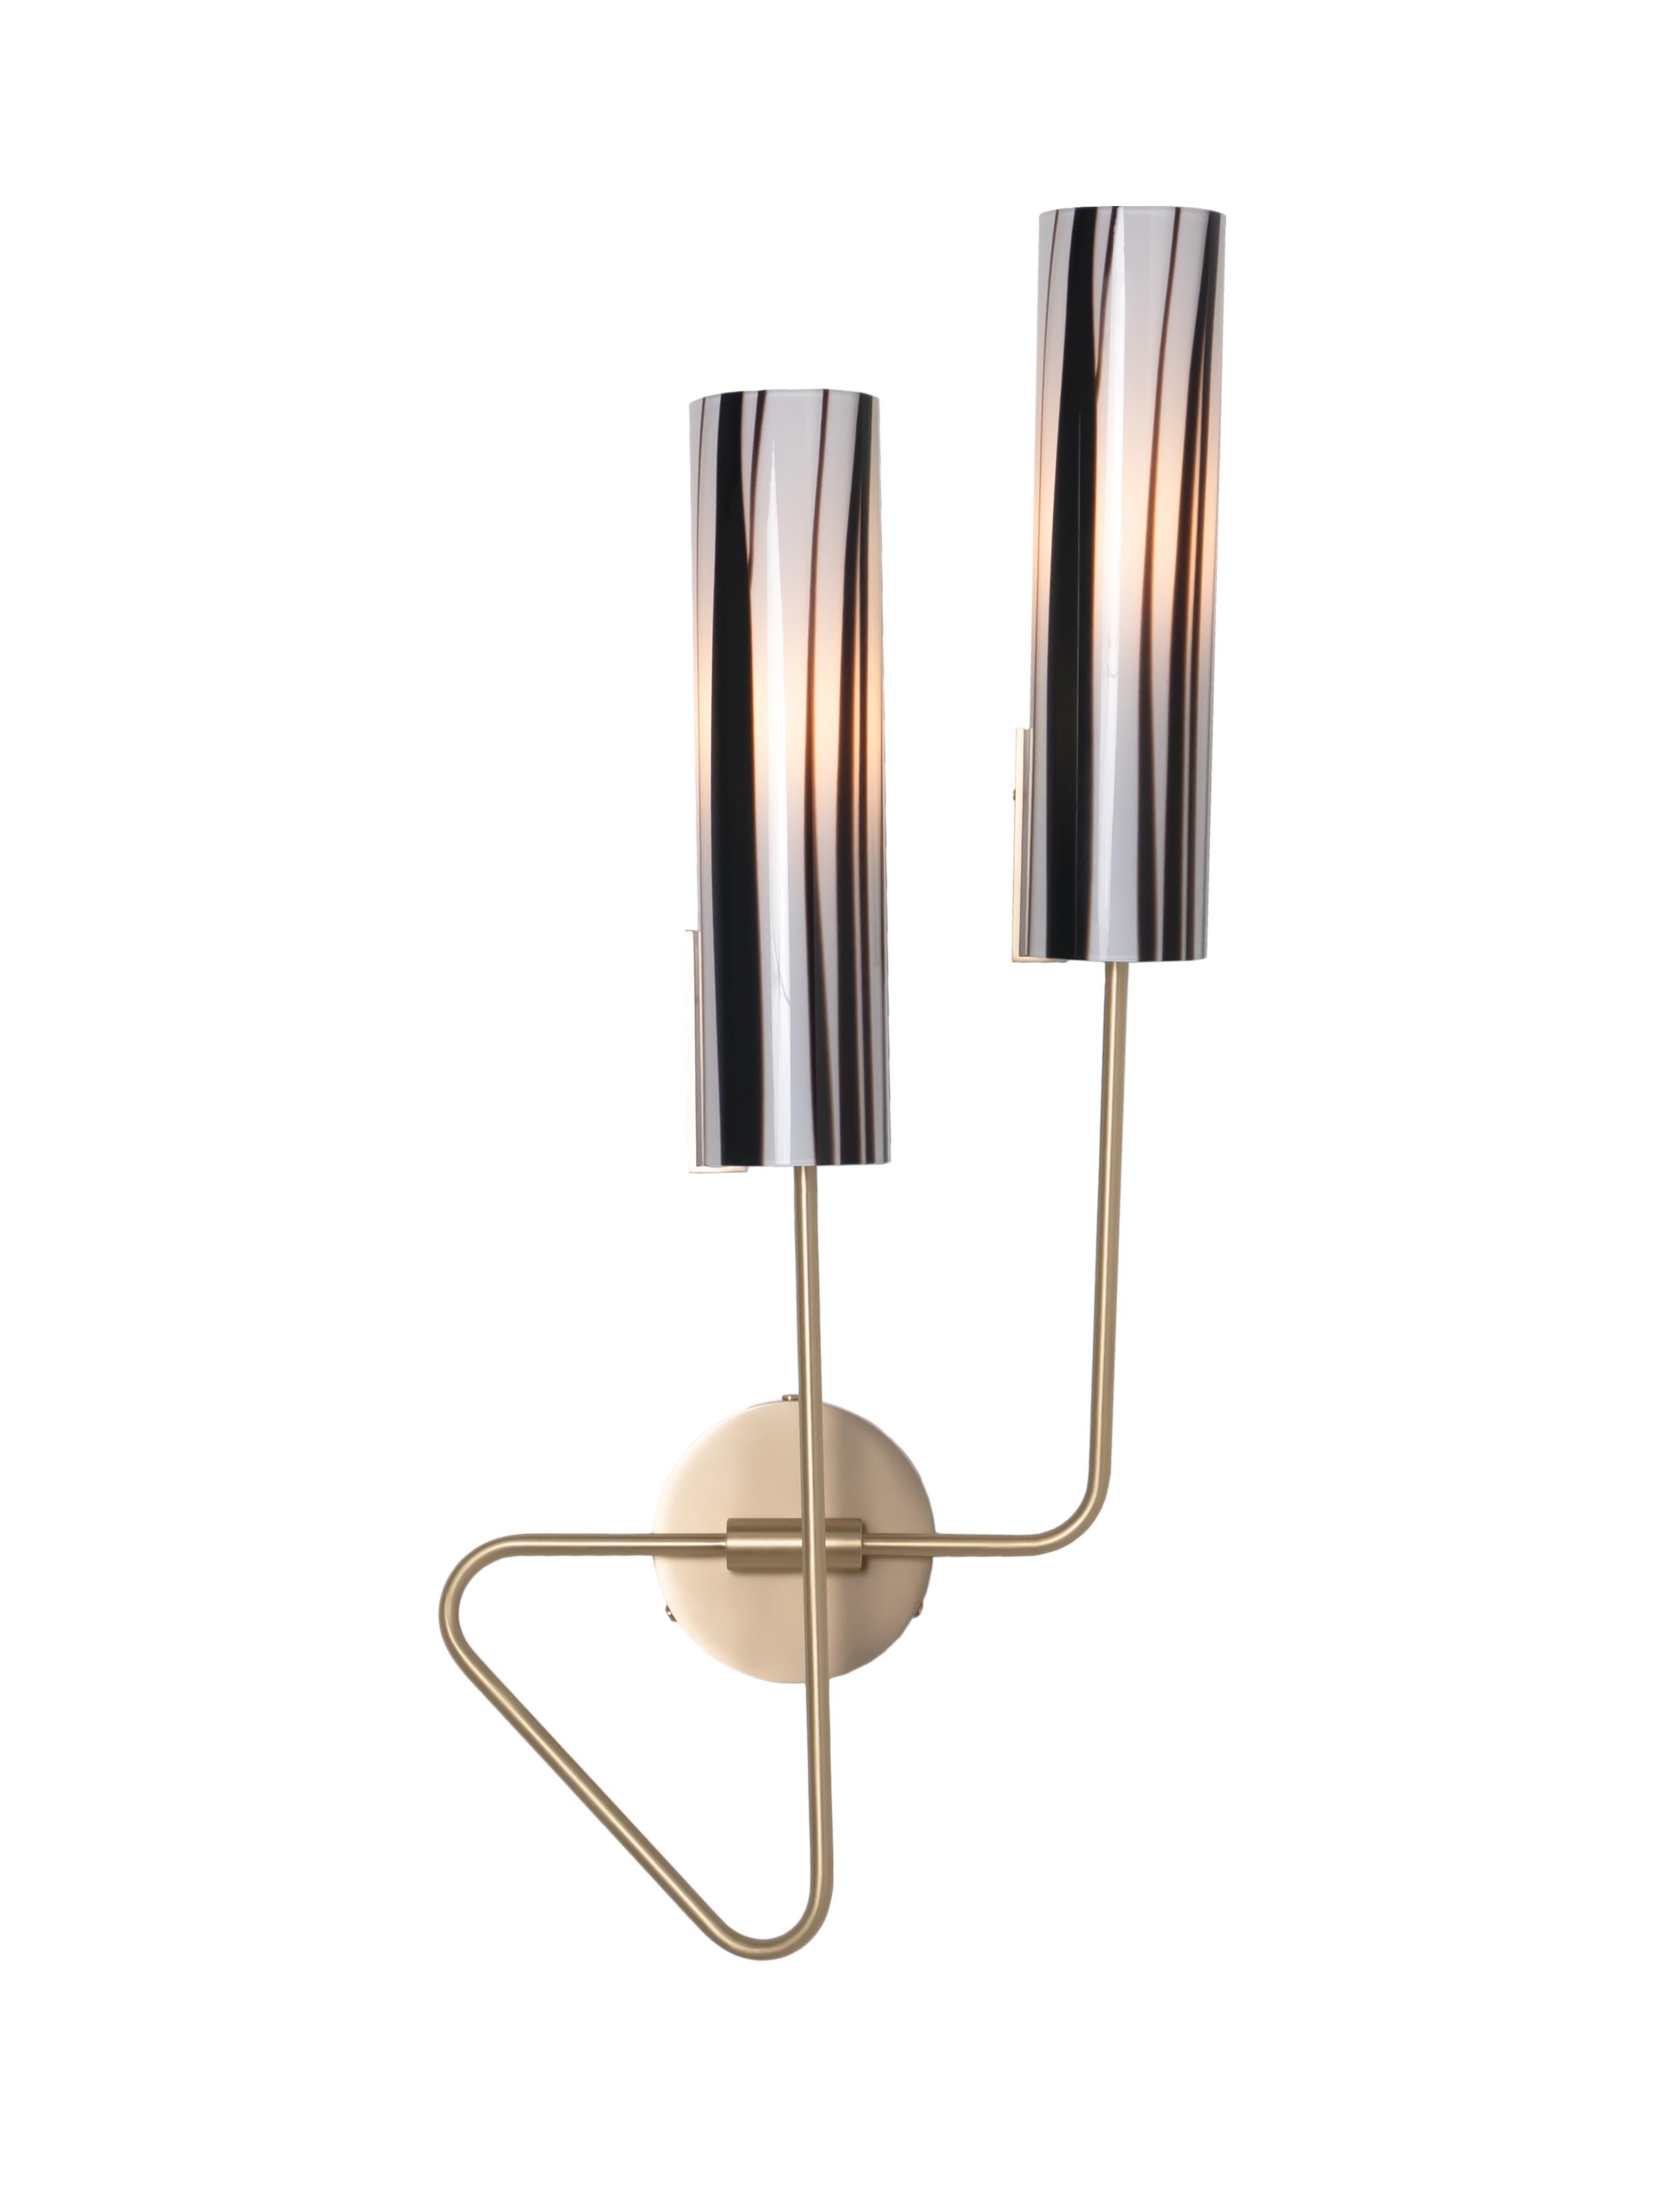 Continuum 01 Sconce: Satin Nickel/Charcoal Ombre Shades by Avram Rusu Studio For Sale 4